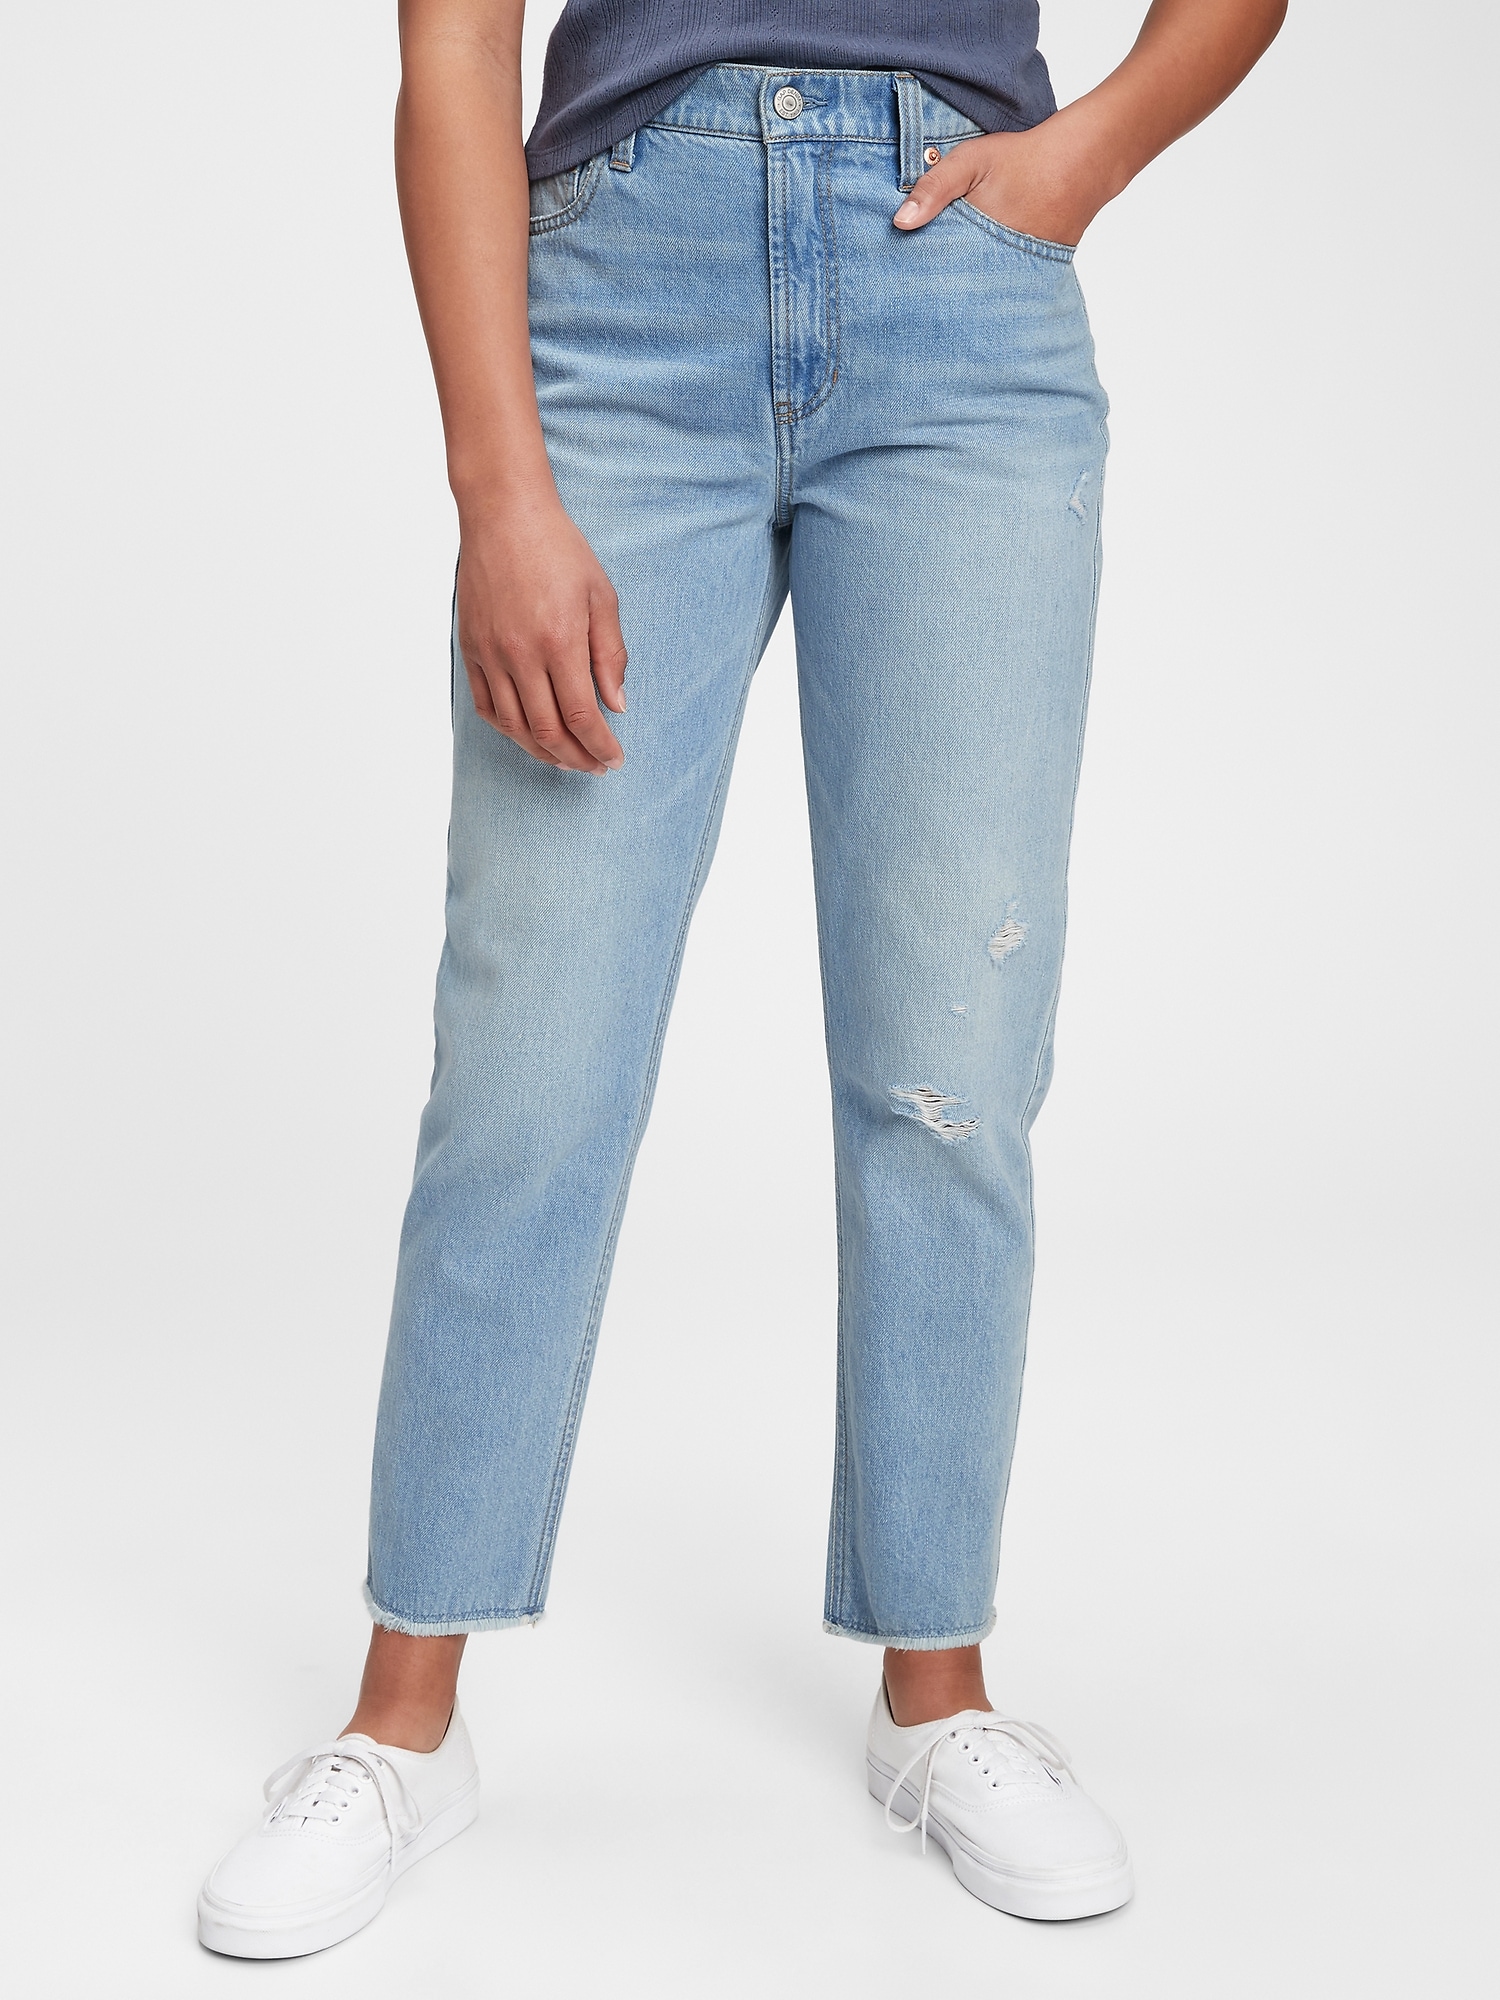 Teen Distressed Sky High-Rise Mom Jeans